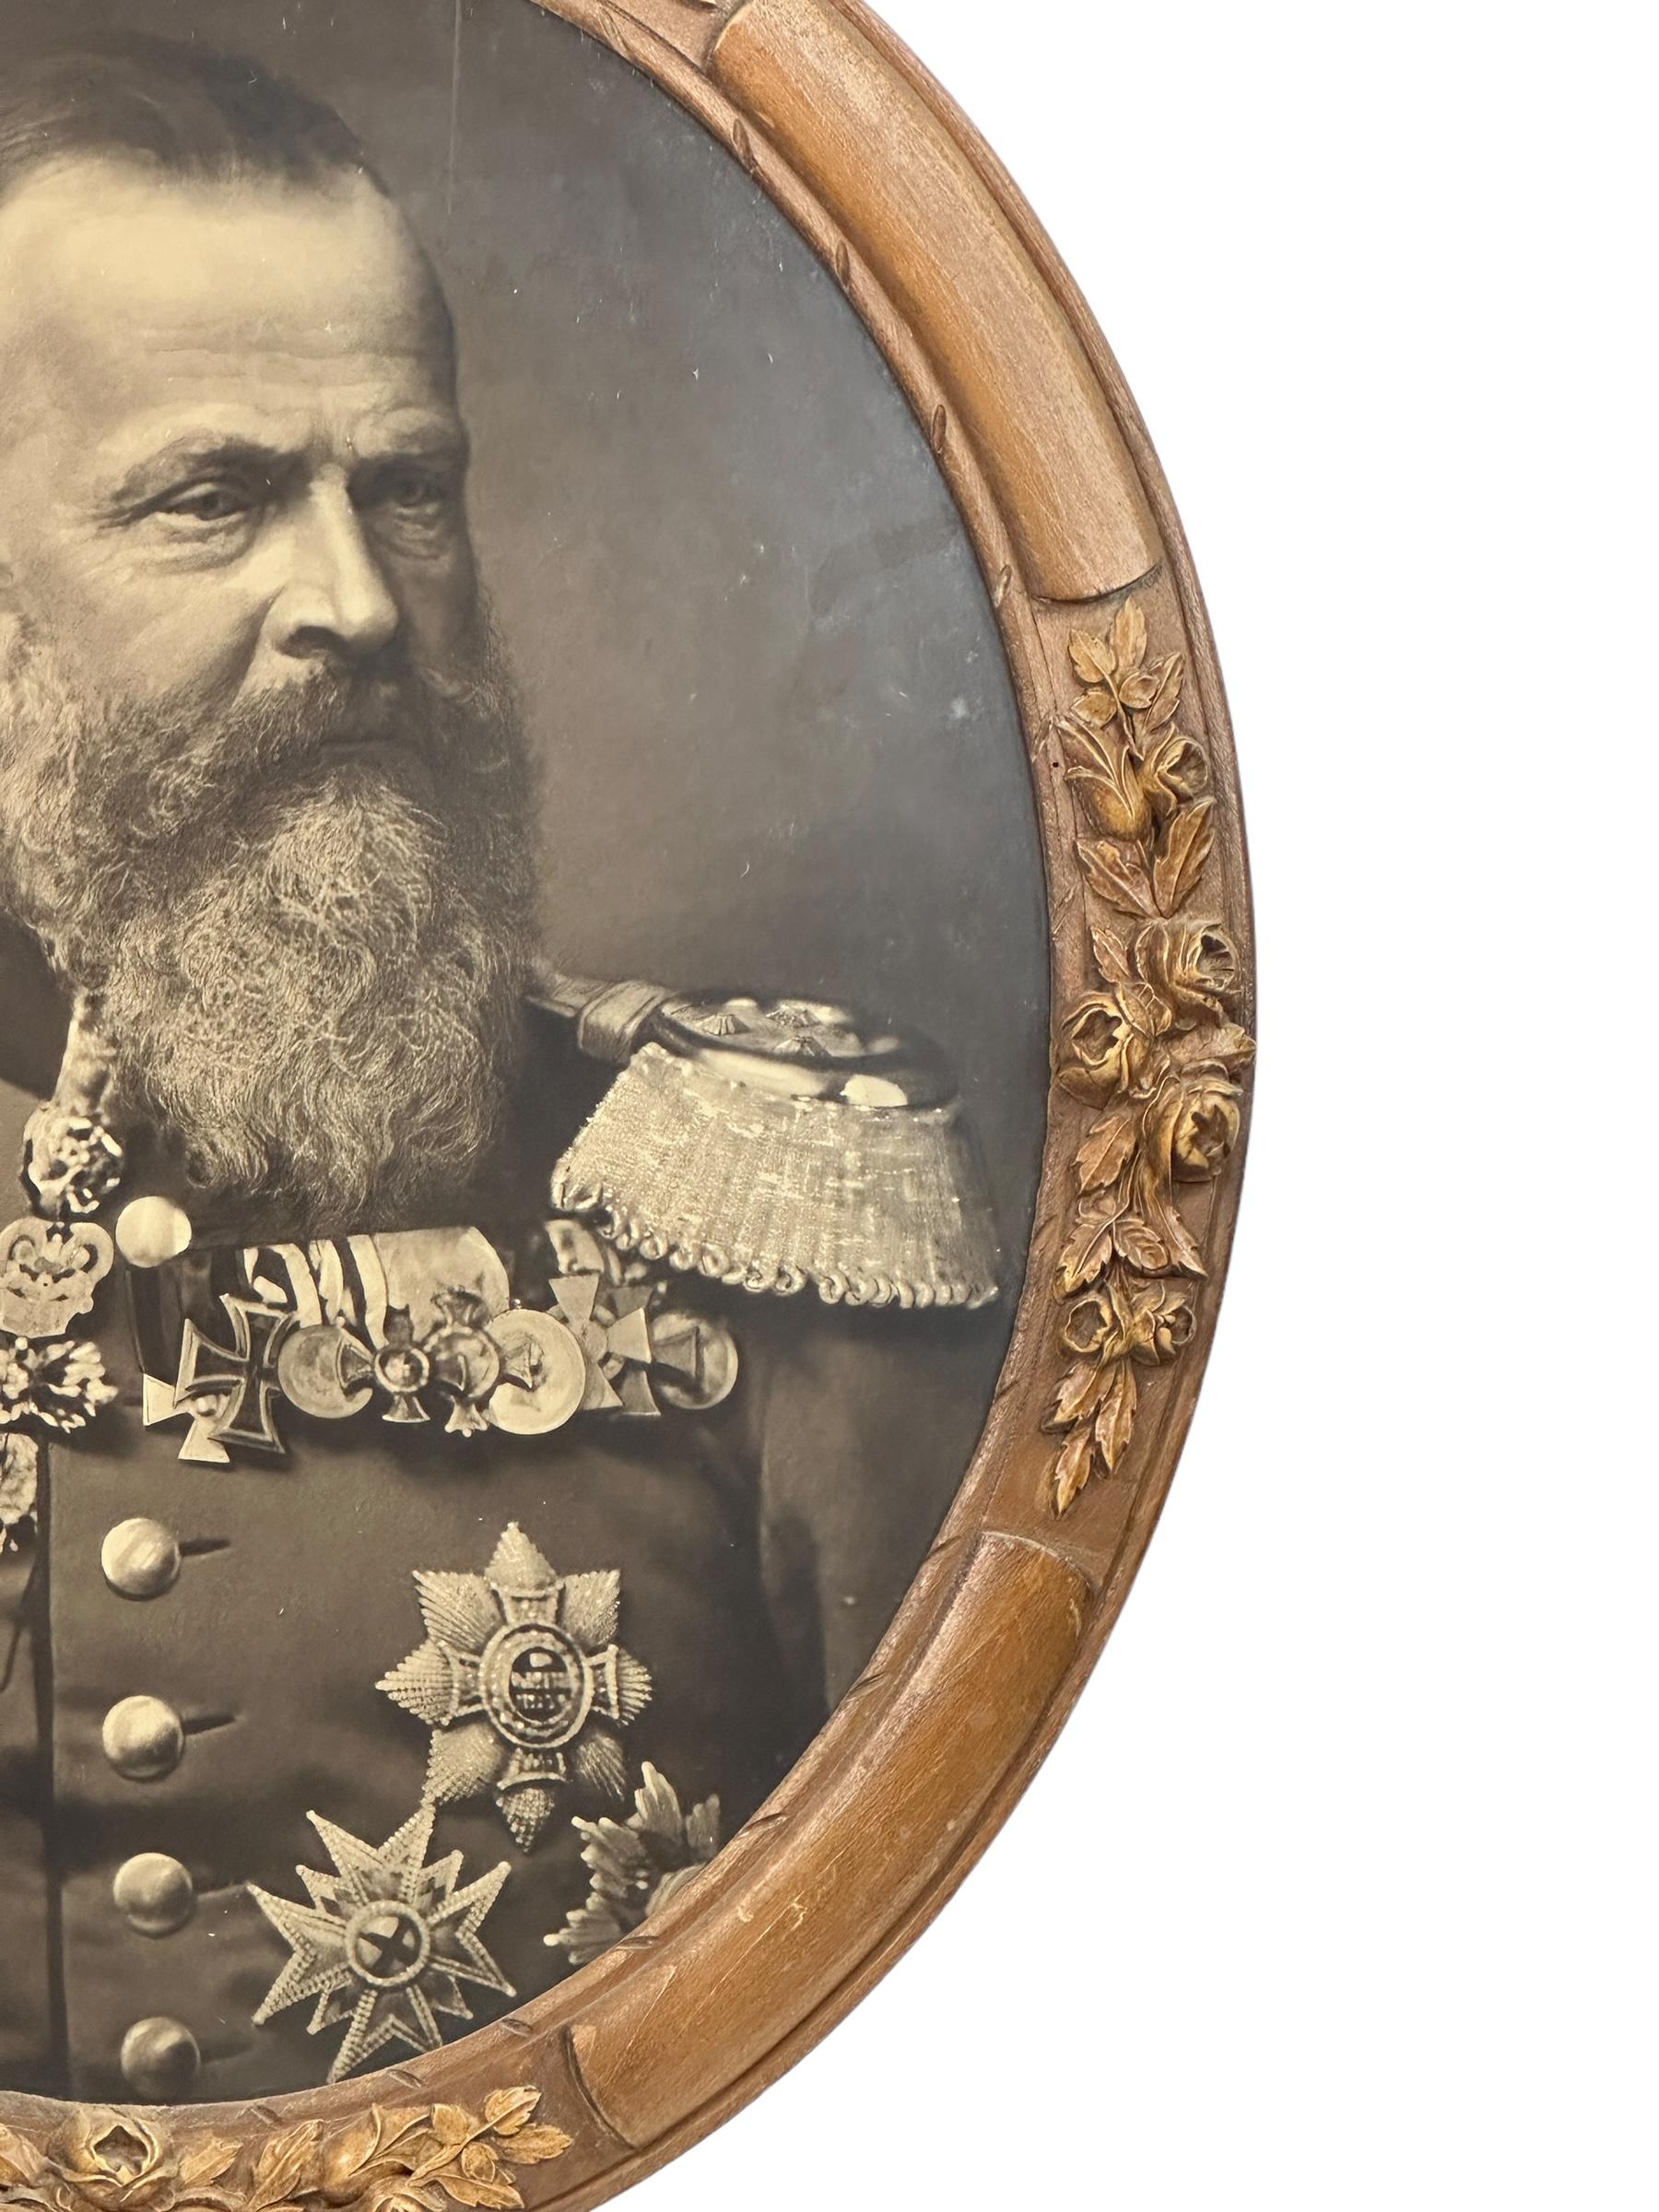 An extraordinary Original Photograph of Luitpold Karl Joseph Wilhelm Ludwig, Prince Regent of Bavaria (12 March 1821 – 12 December 1912).
Beautiful hand crafted Black Forest style frame. We believe it is from the 1880s also. The photograph was taken